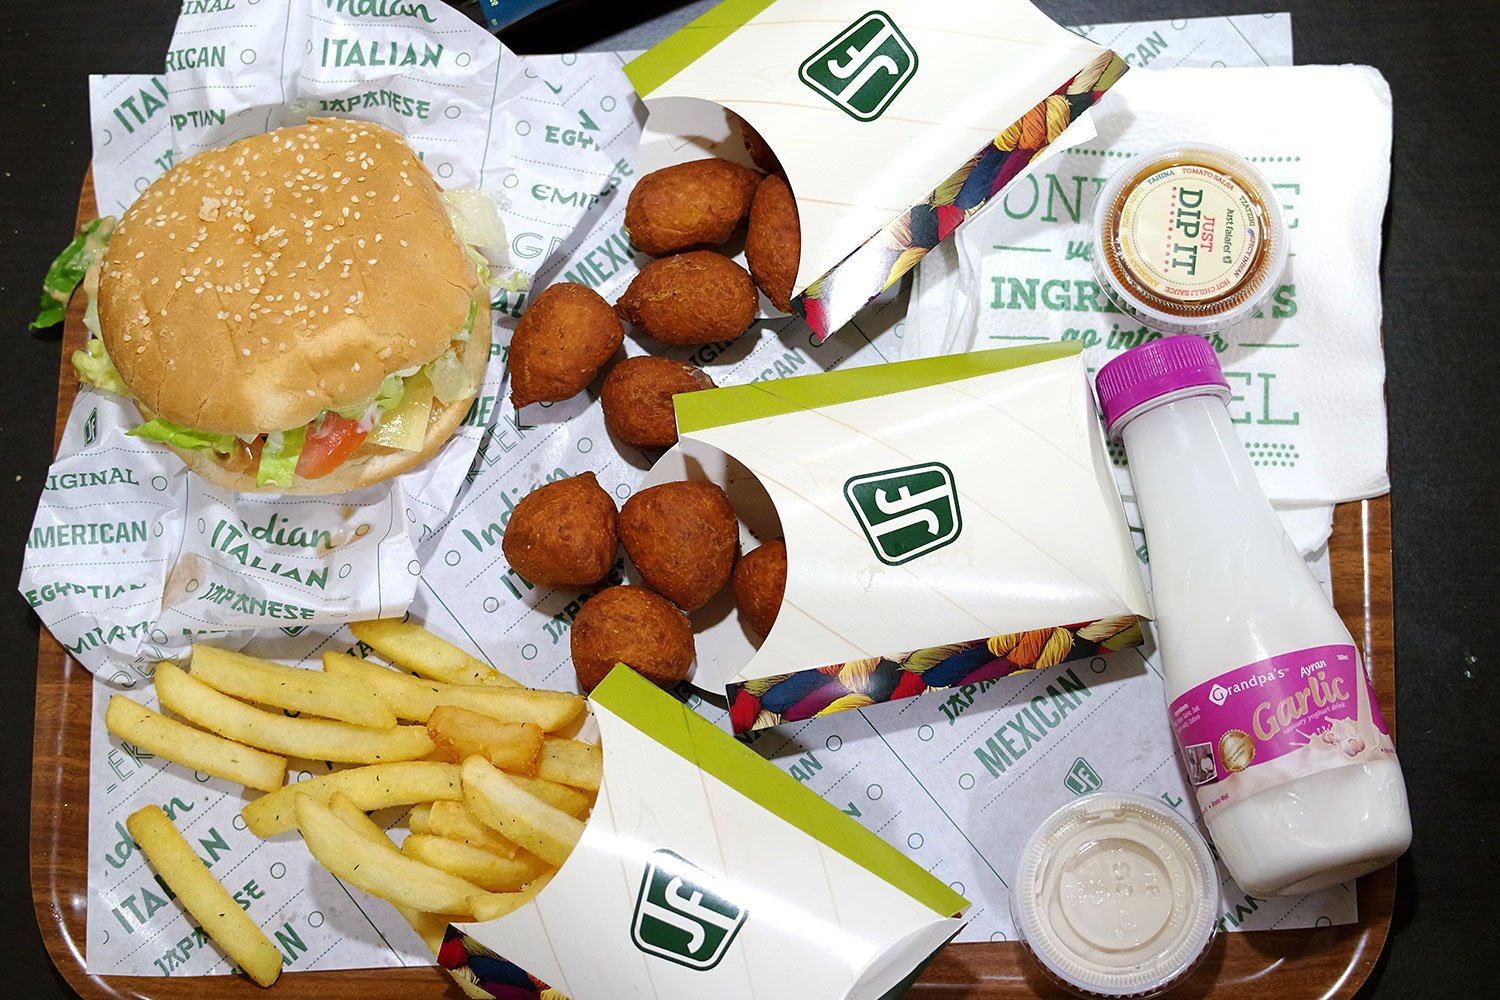 Clockwise from top left: American Sandwich, spinach and feta poppers, salsa dip, garlic yoghurt drink, fries and jalapeño cheese poppers in the centre.